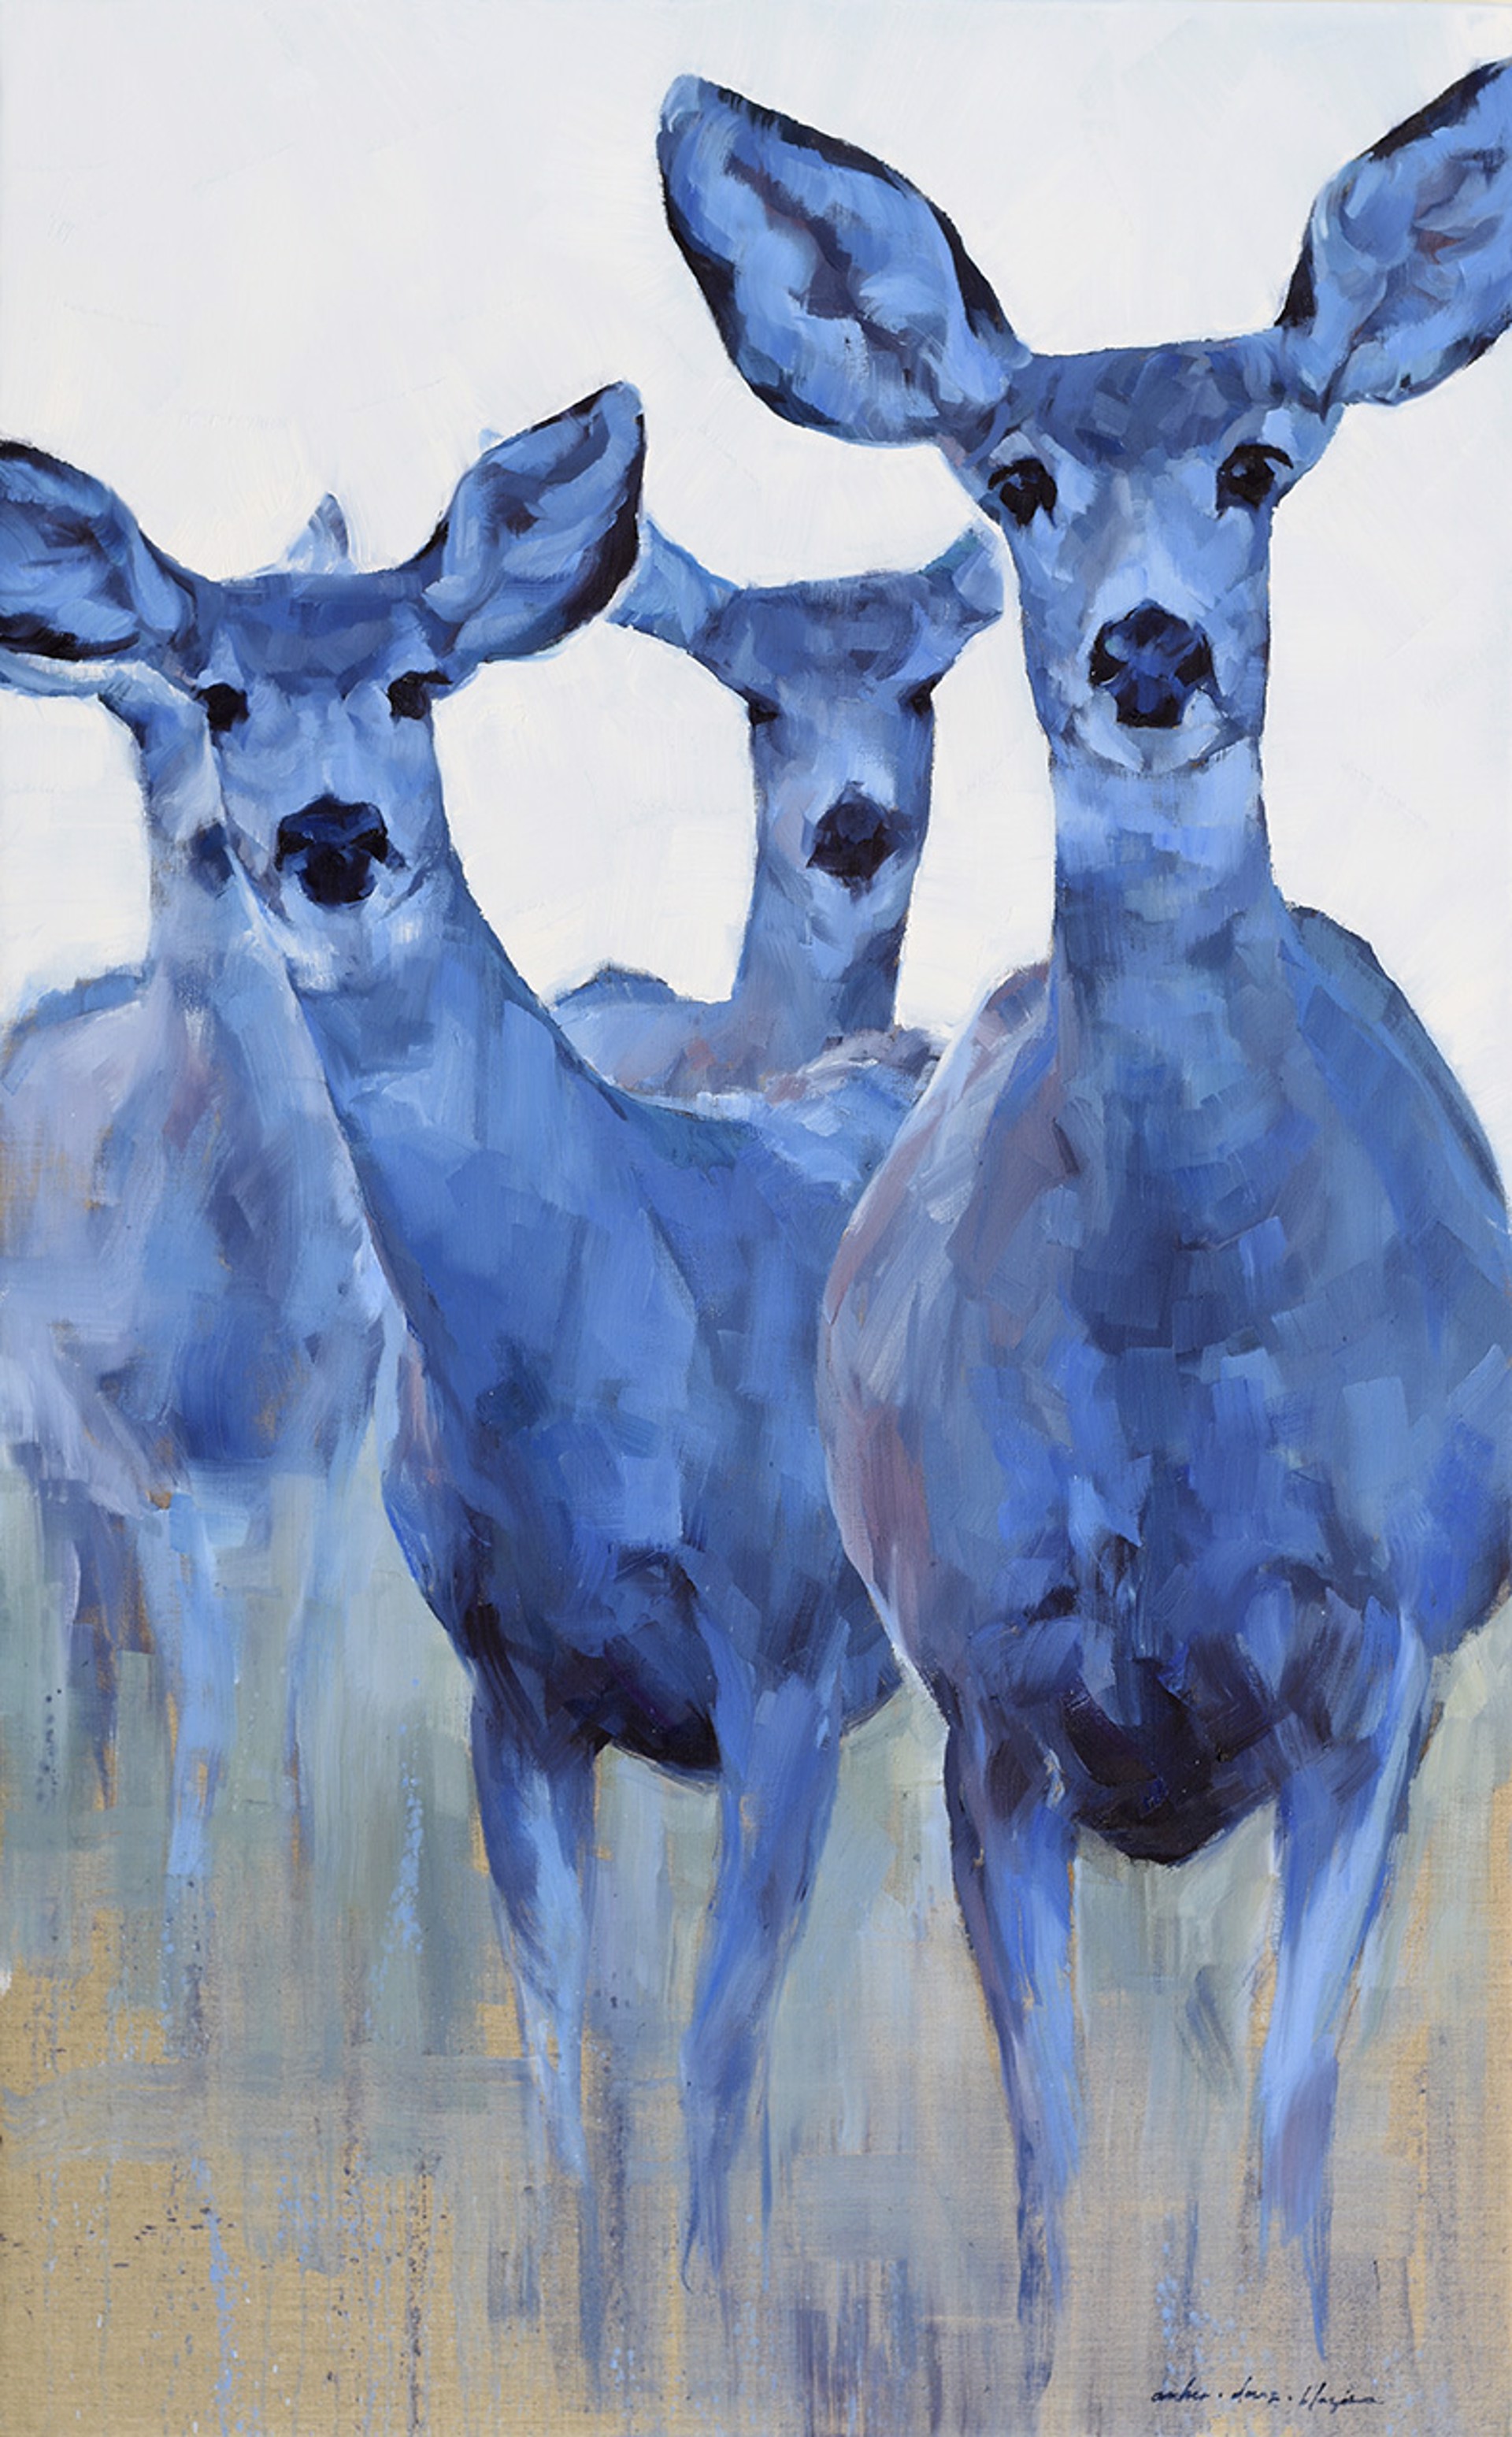 A Contemporary Oil Painting Of Four Alert Blue Deer Looking Back At The Viewer, By Amber Blazina, Available At Gallery Wild